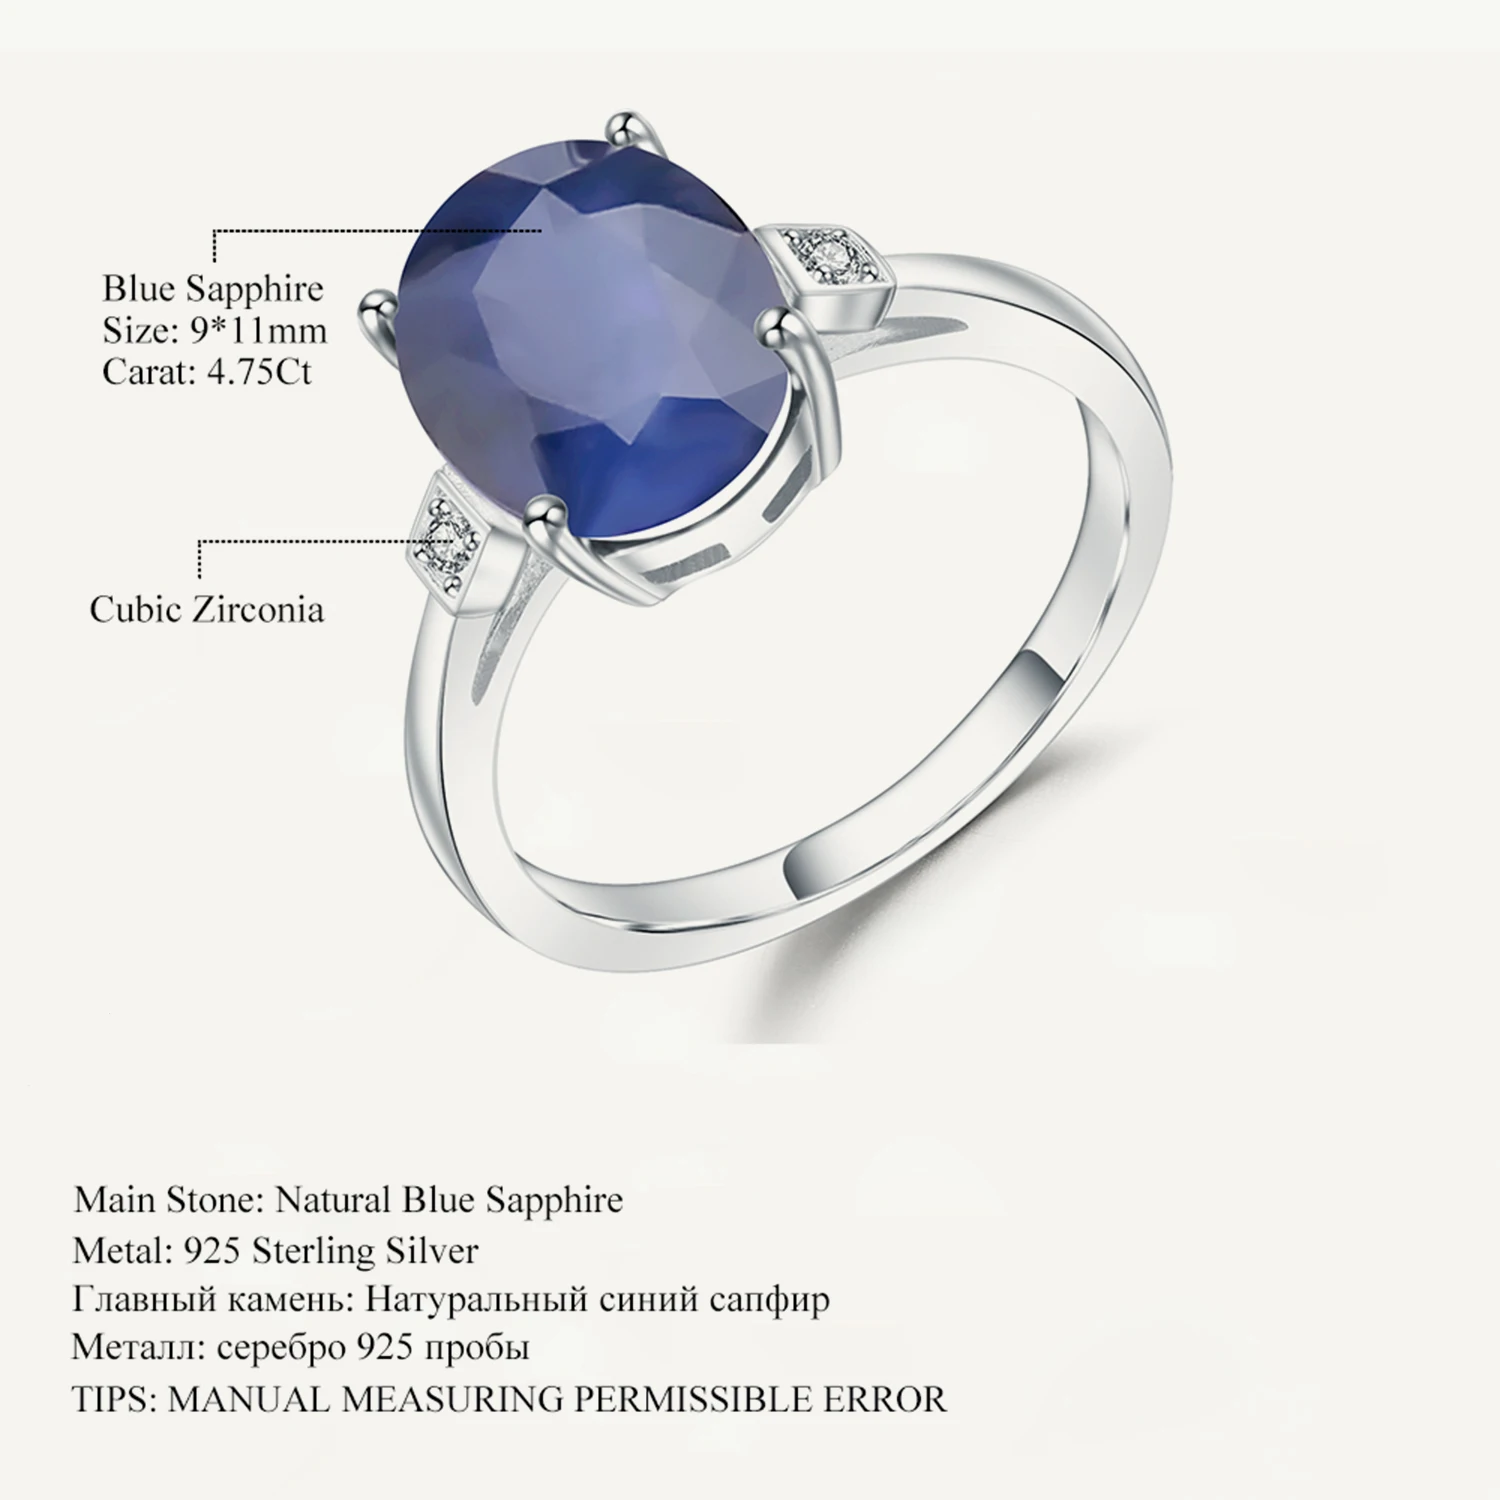 4.78Ct Oval Natural Blue Sapphire Gemstone Ring 925 Sterling Silver Simple Weddi - £57.04 GBP